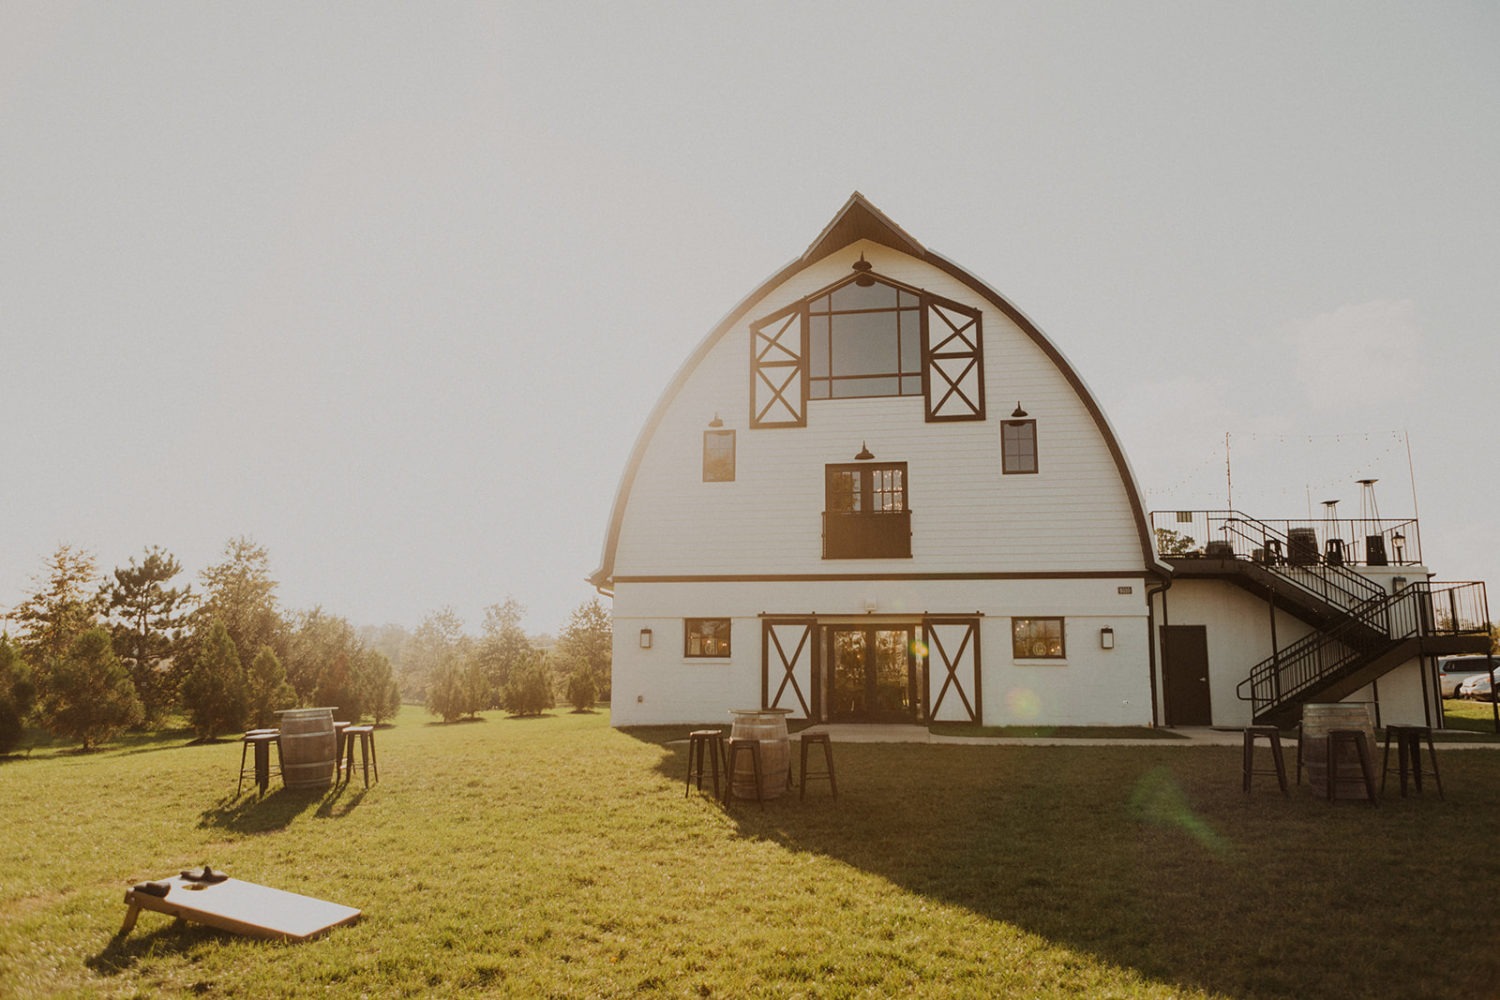 Sunset exterior and lawn of Virginia barn wedding venue